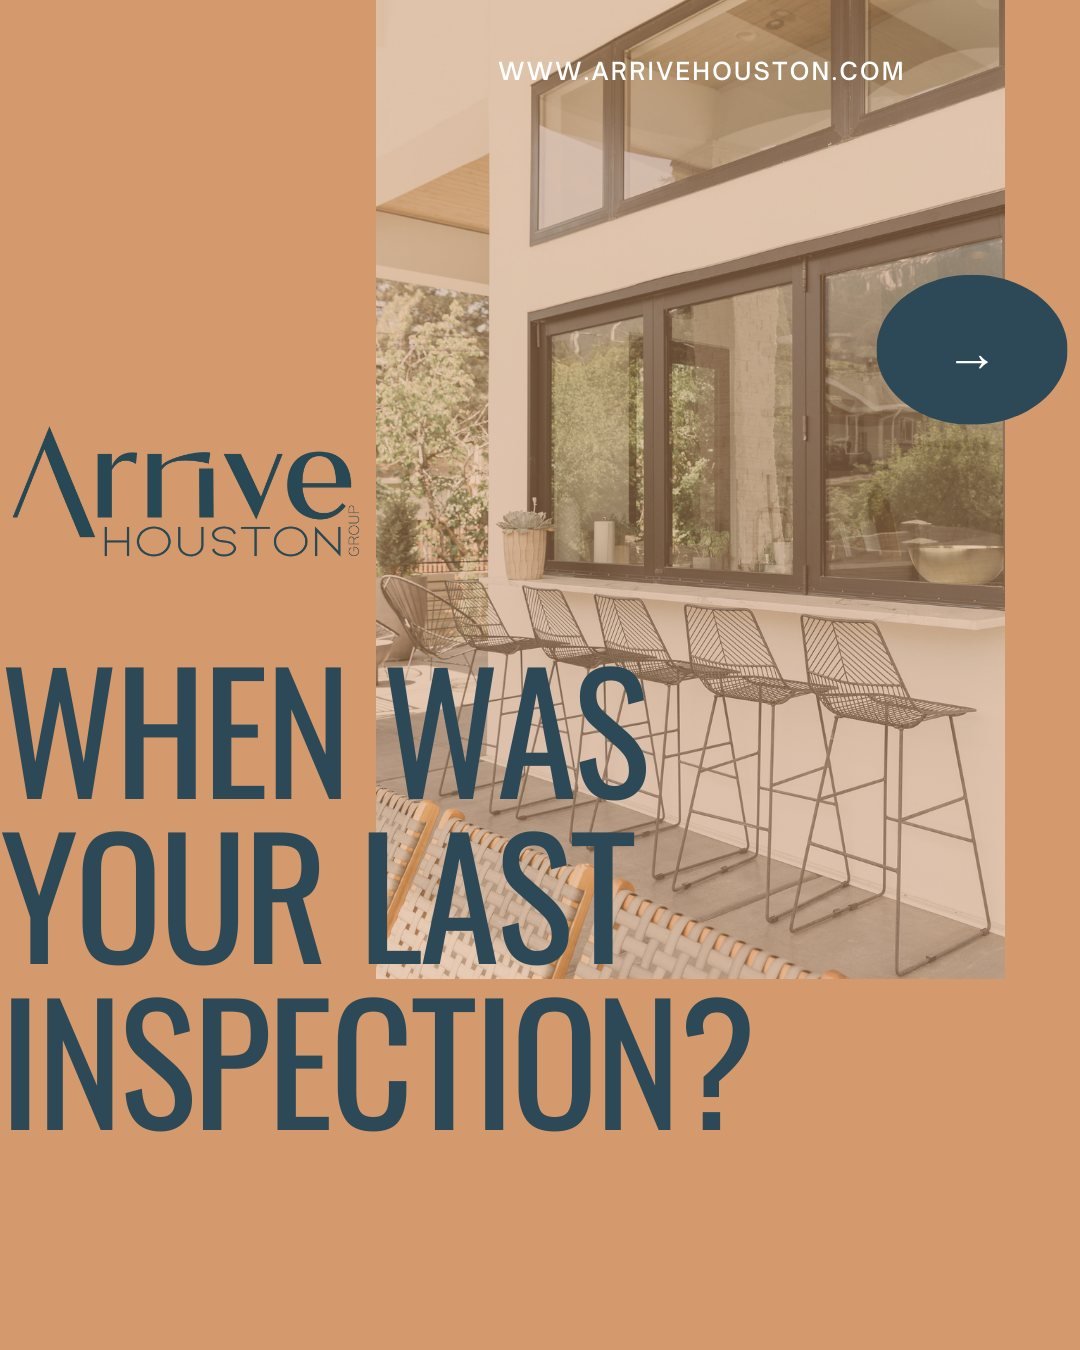 Home inspections shouldn&rsquo;t be a one-time box to check when you're ready to sell.

Whether you're a new homeowner or have been living in your dream home for years, periodic inspections are a smart investment in the long-term health of your prope